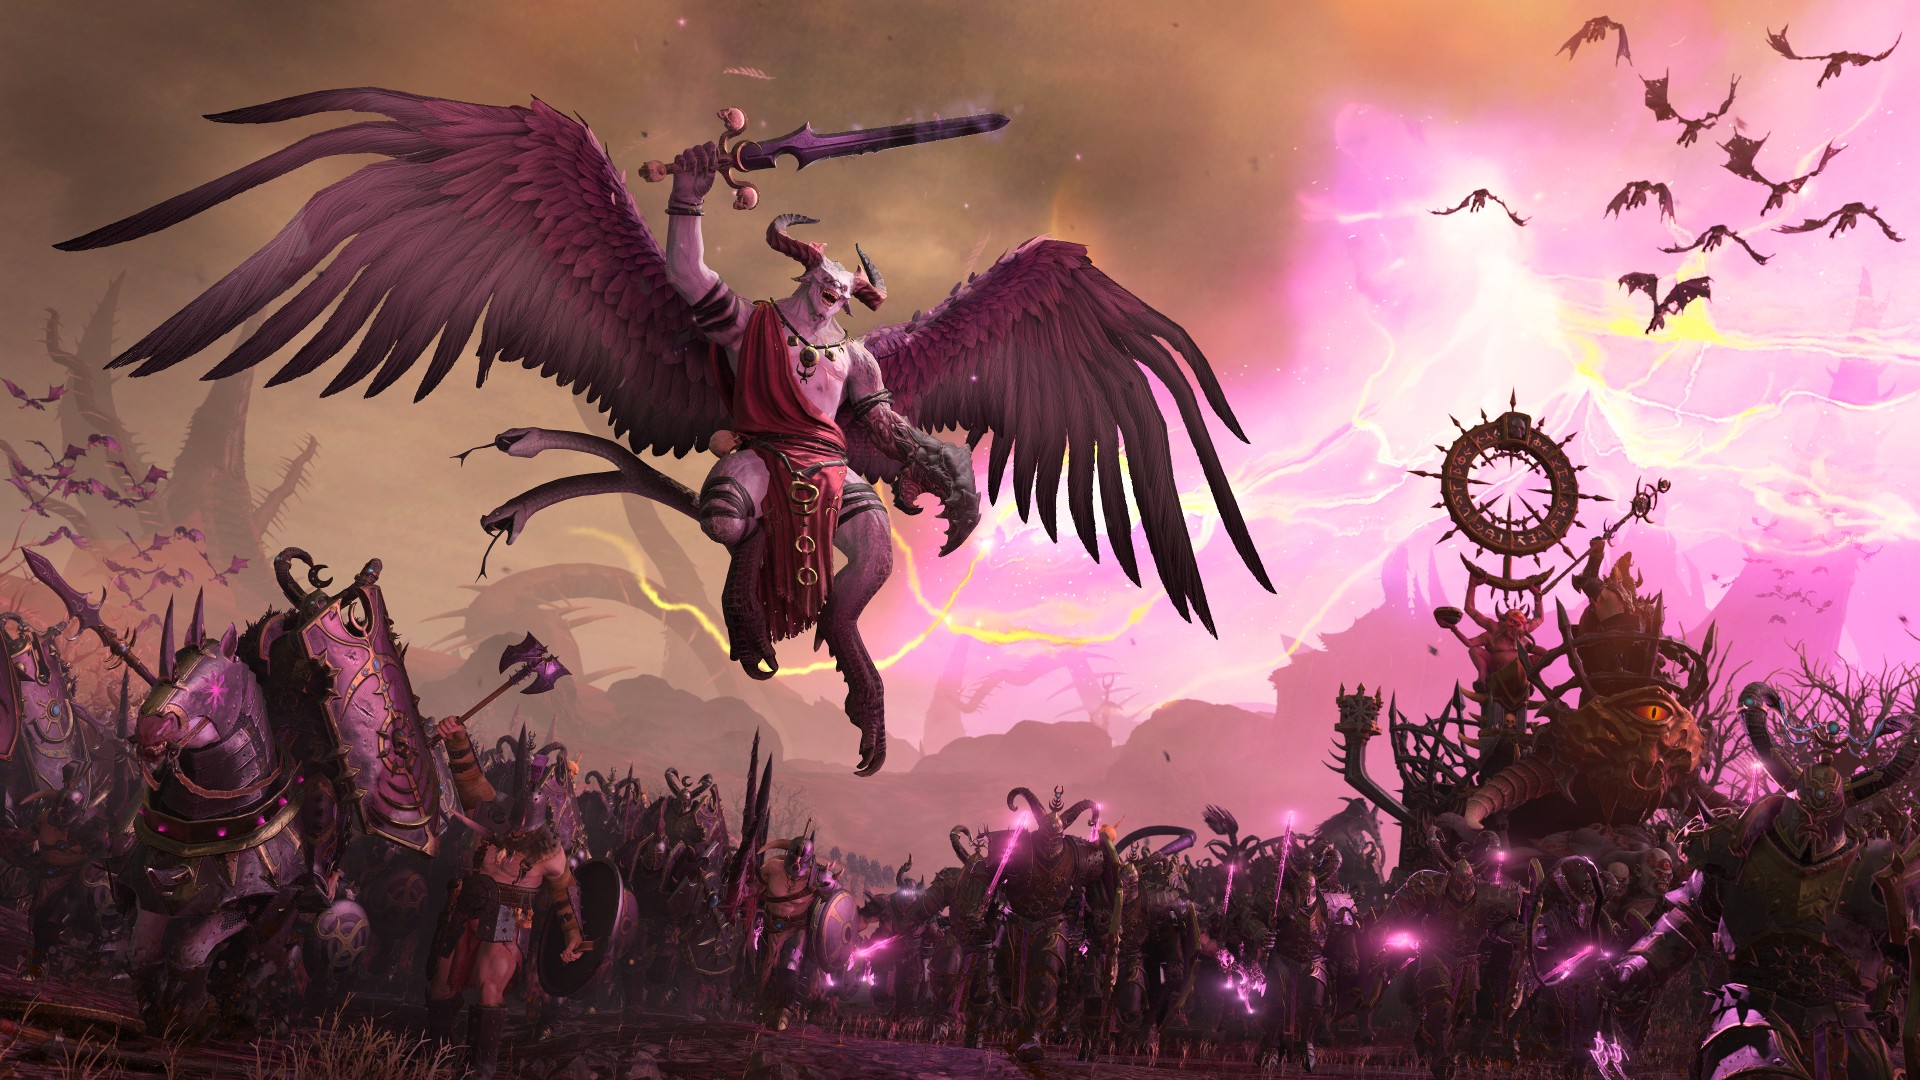 Warhammer 3: Immortal Empires dev says settlements 'top of the list': A gigantic flying demon soars above a fantasy battleground